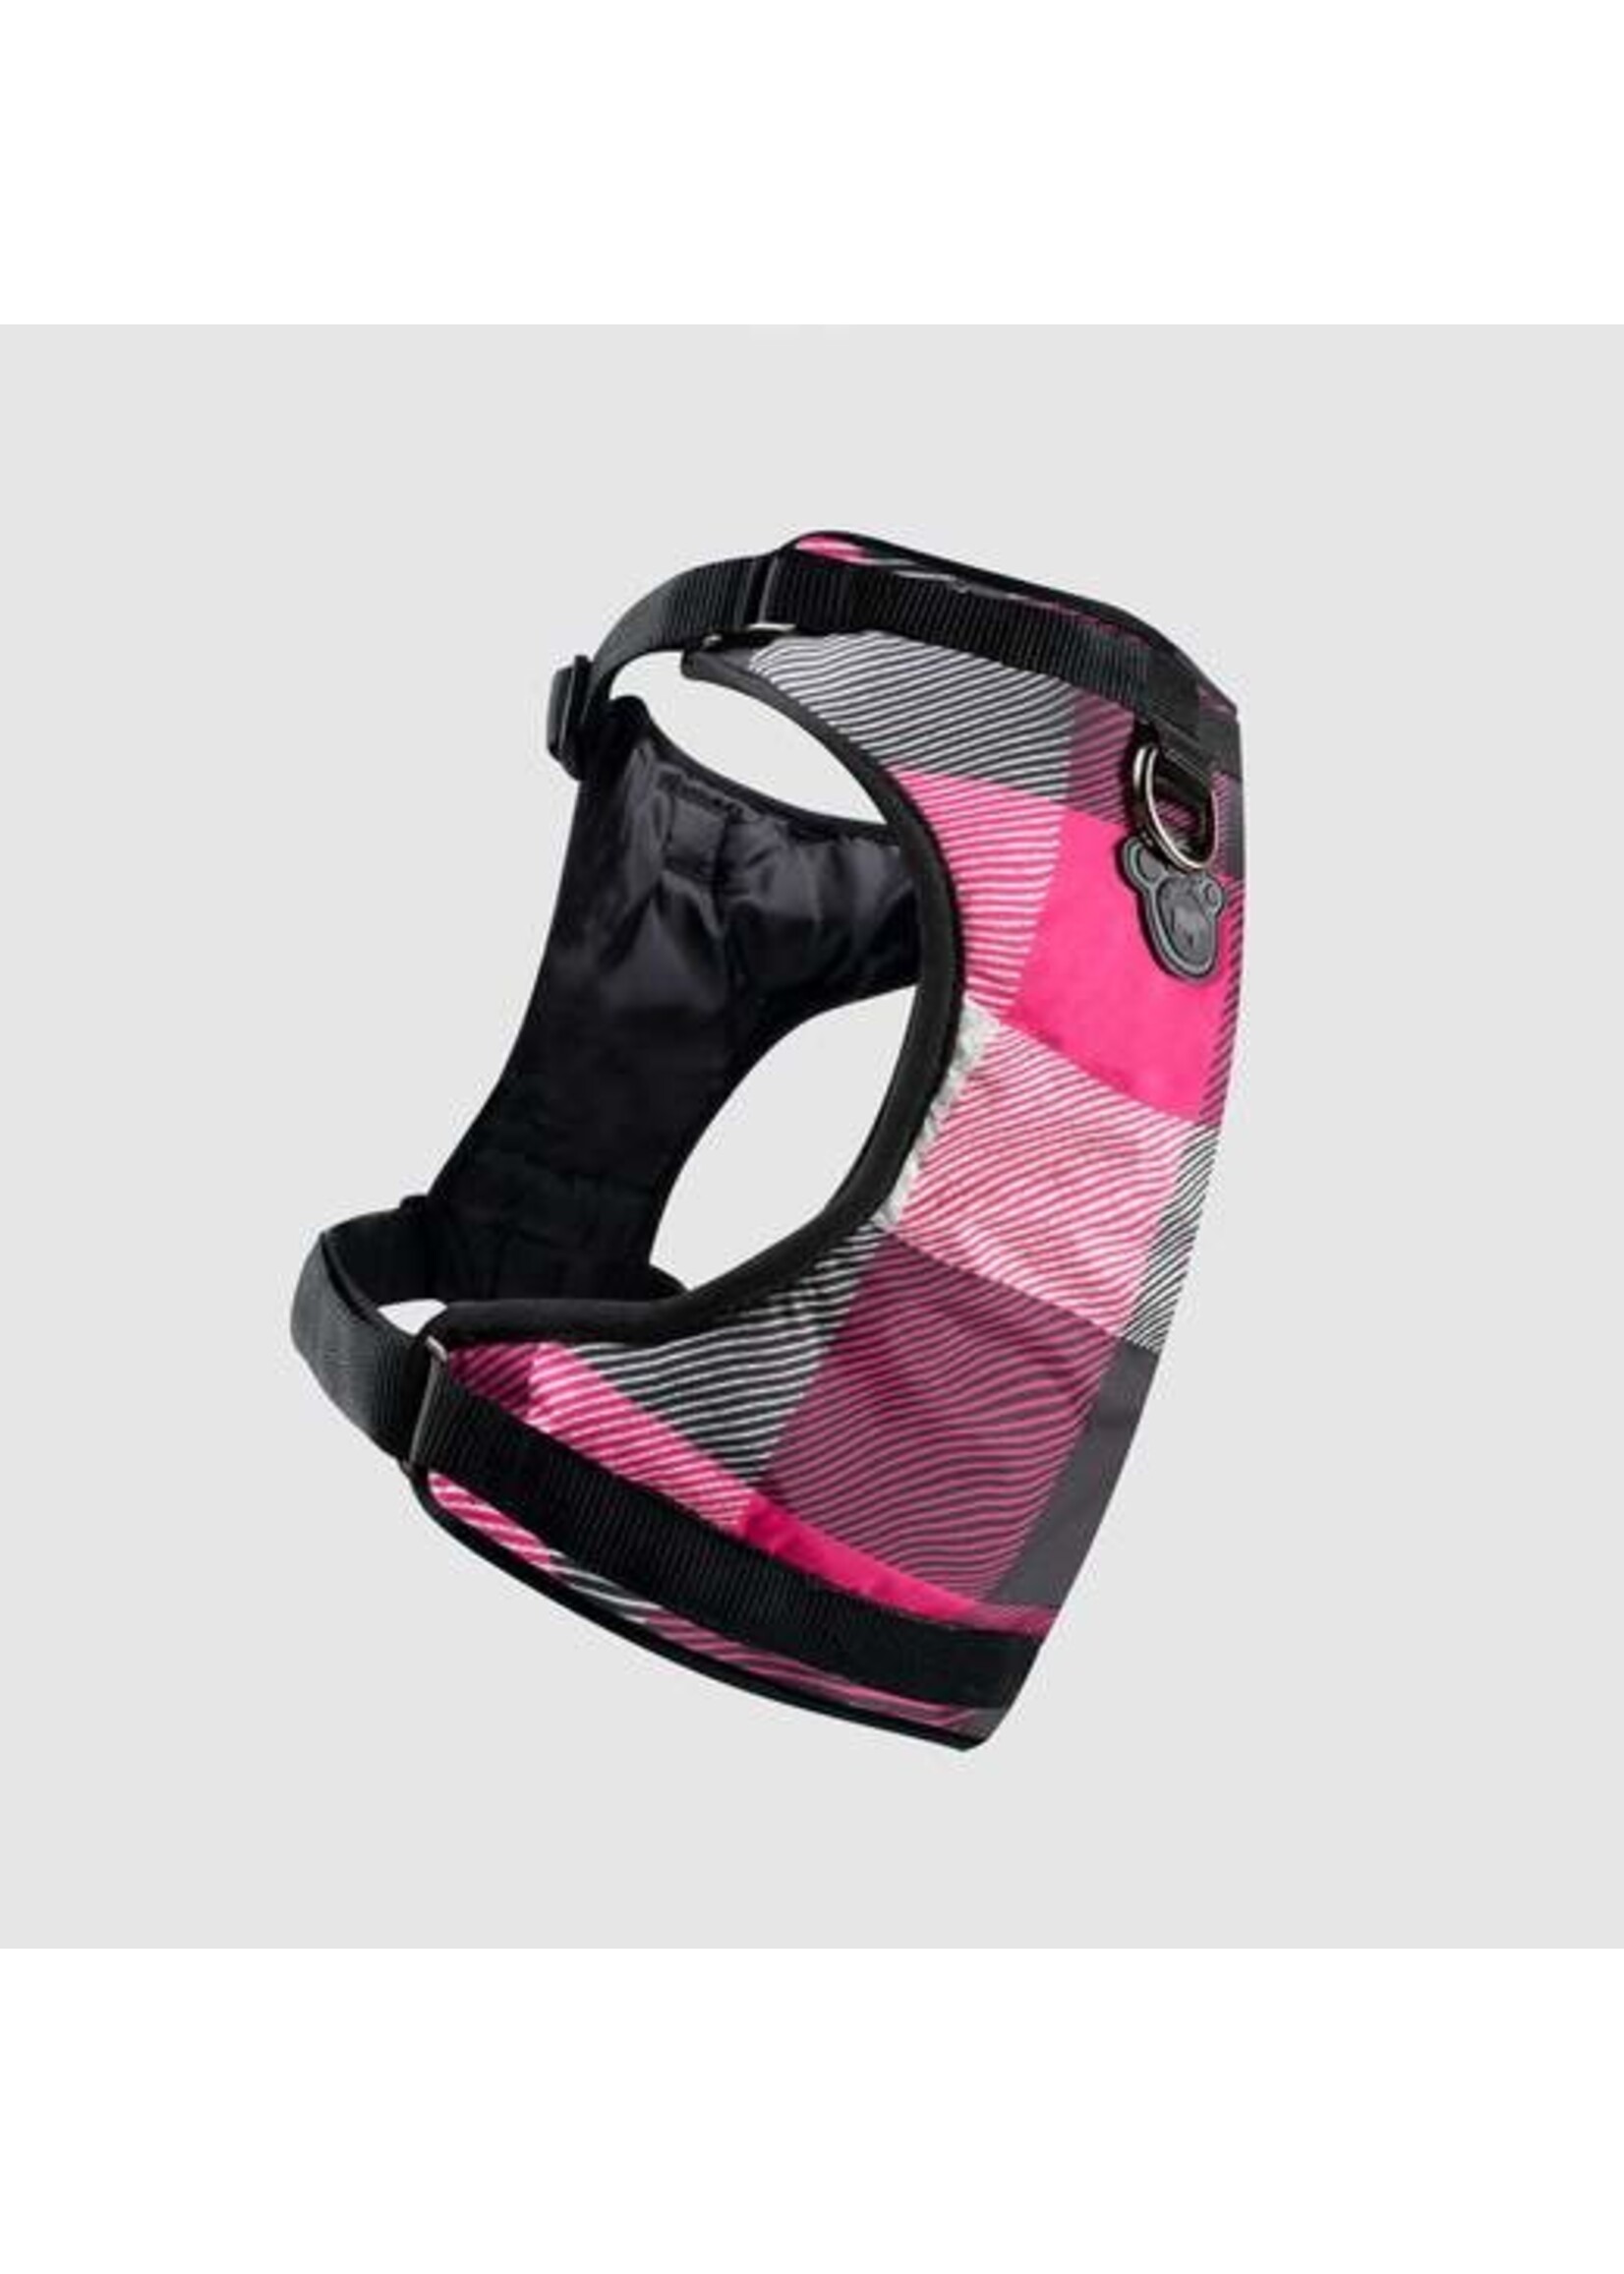 Canada Pooch Canada Pooch Everything Harness Water-Resistant Pink Plaid